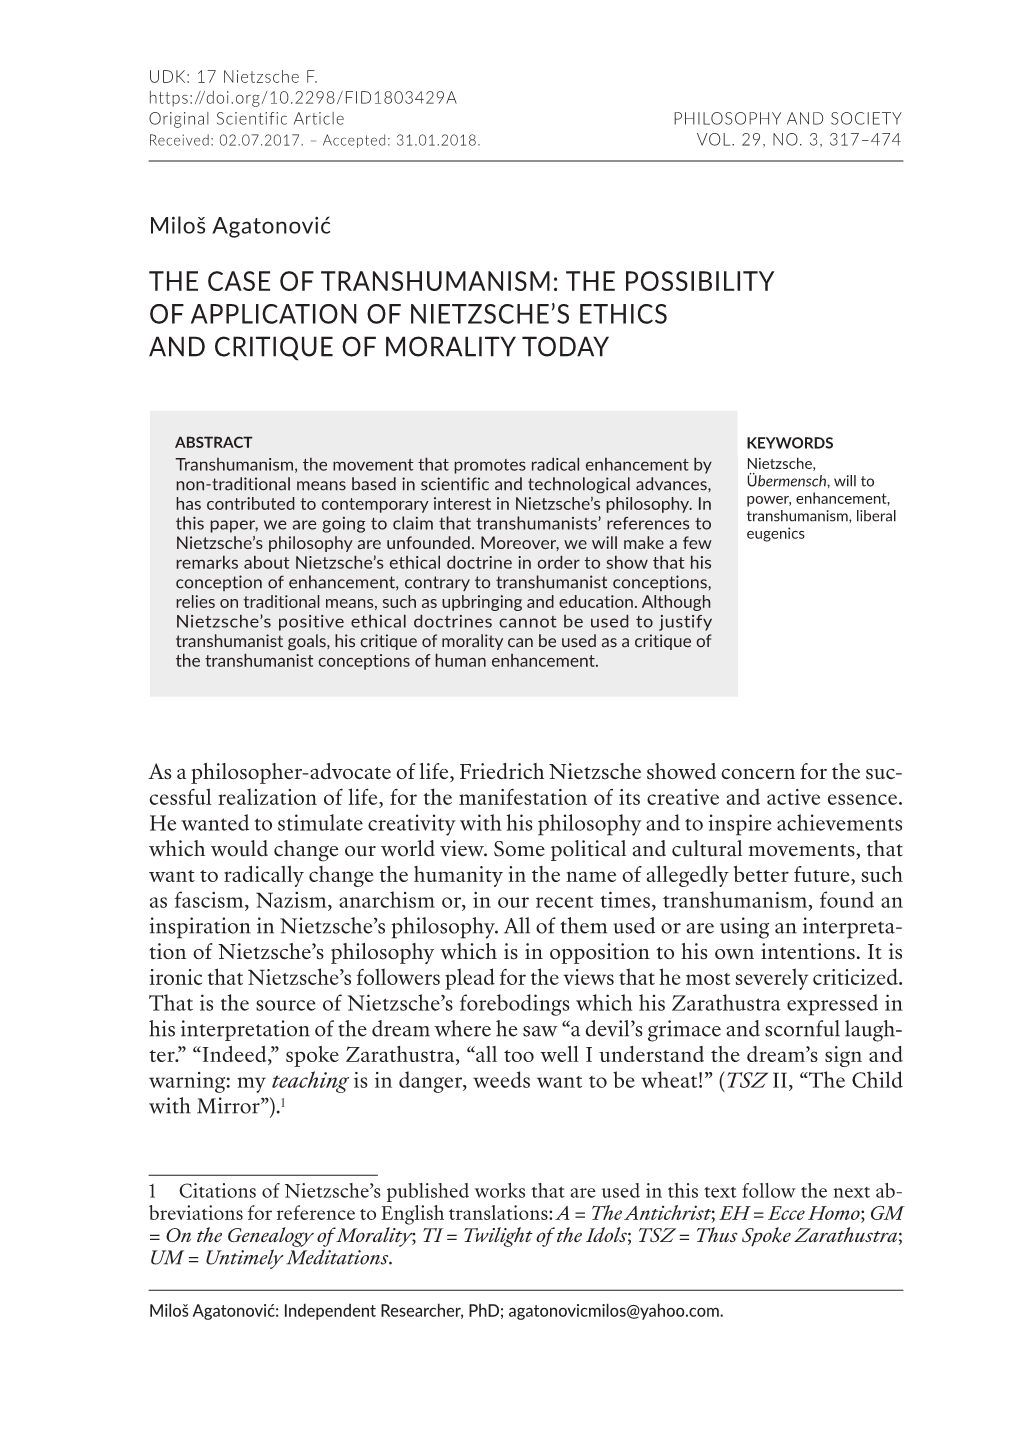 The Case of Transhumanism: the Possibility of Application of Nietzsche's Ethics and Critique of Morality Today